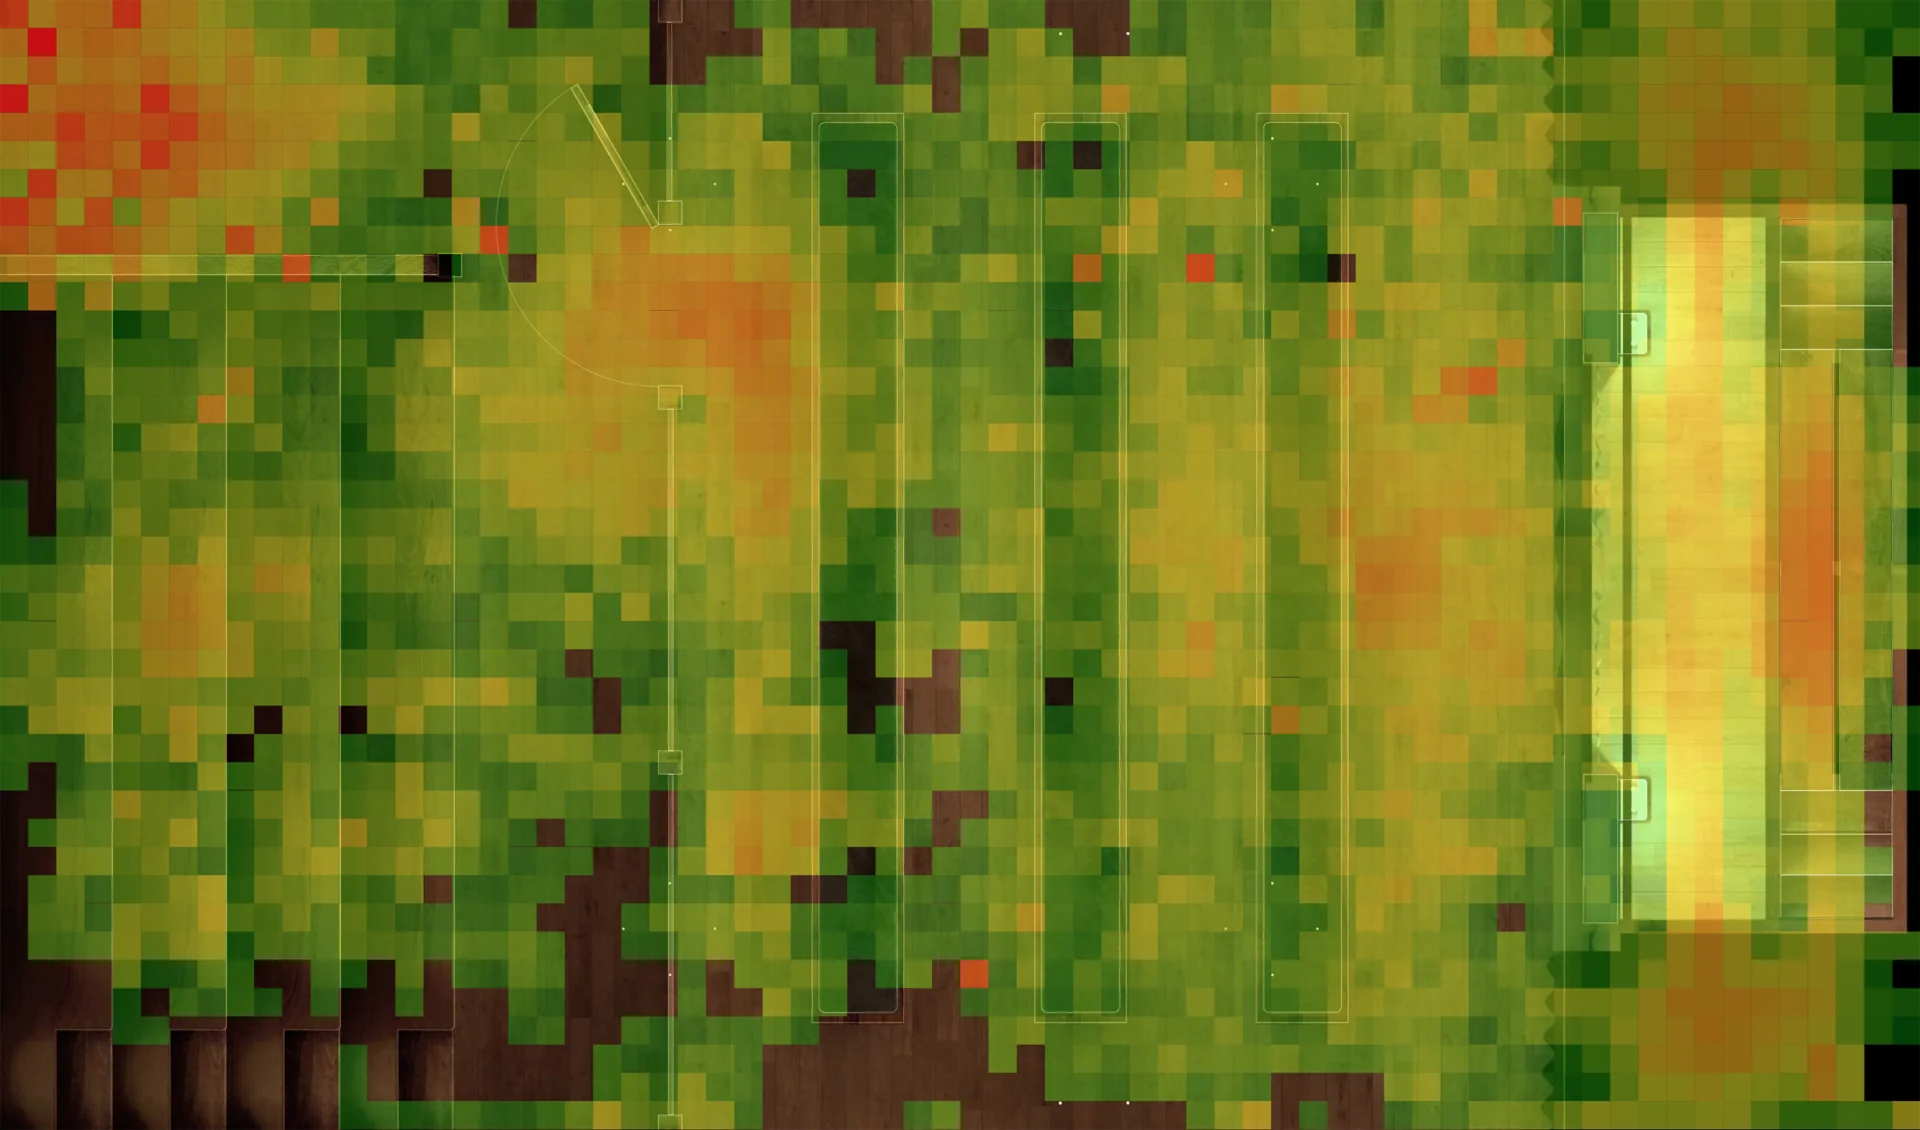 Heatmap showing the most visited spaces